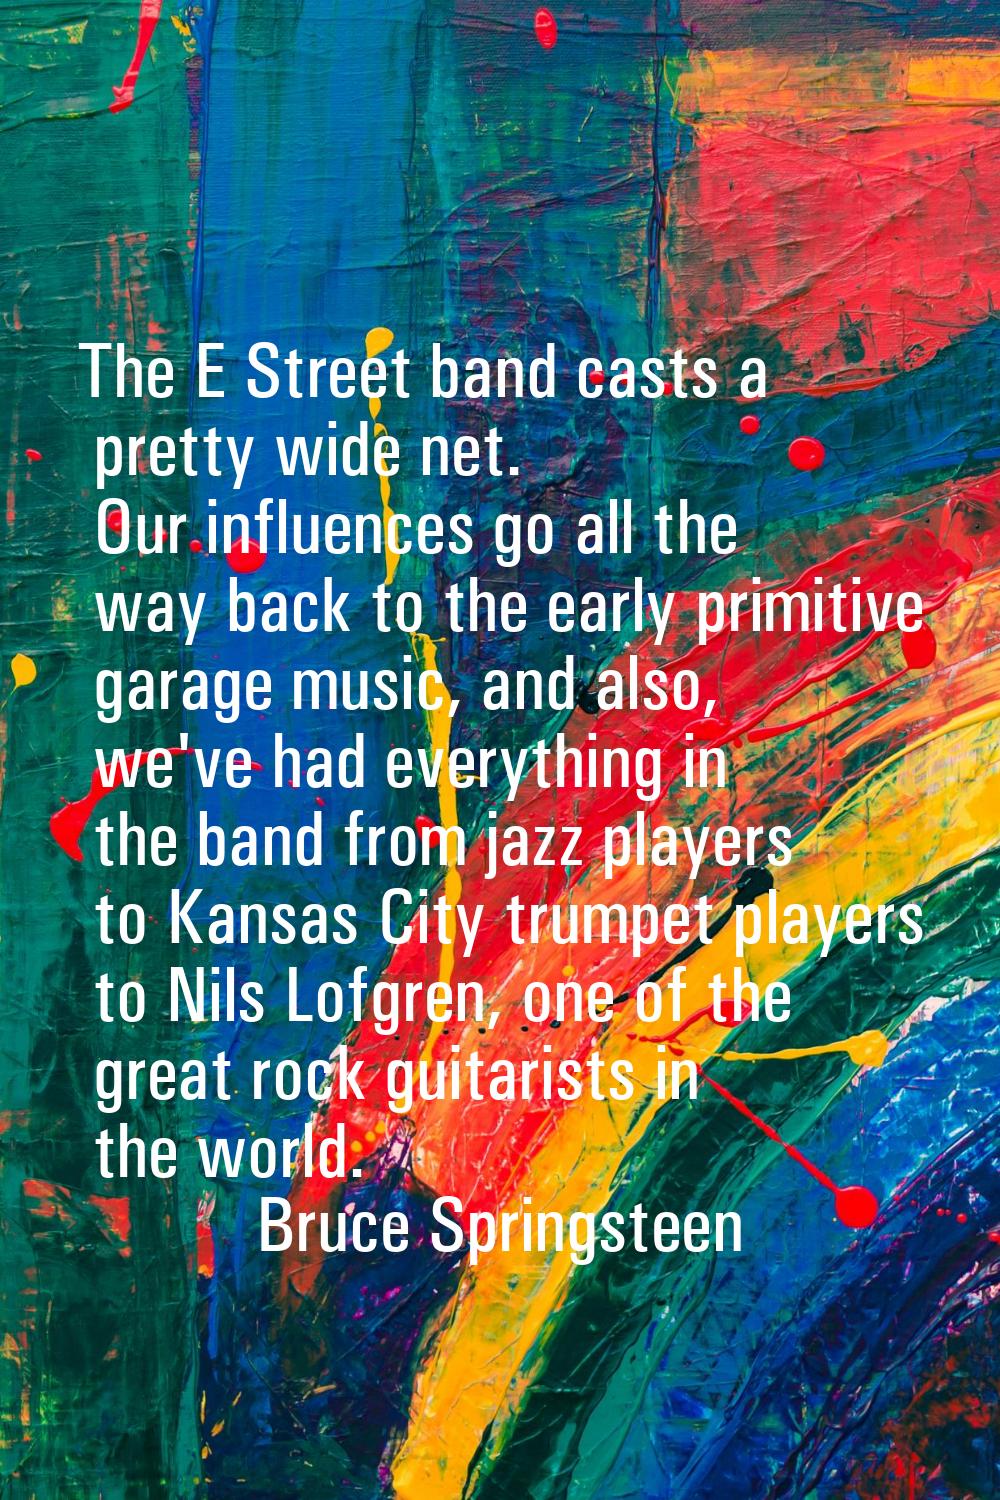 The E Street band casts a pretty wide net. Our influences go all the way back to the early primitiv